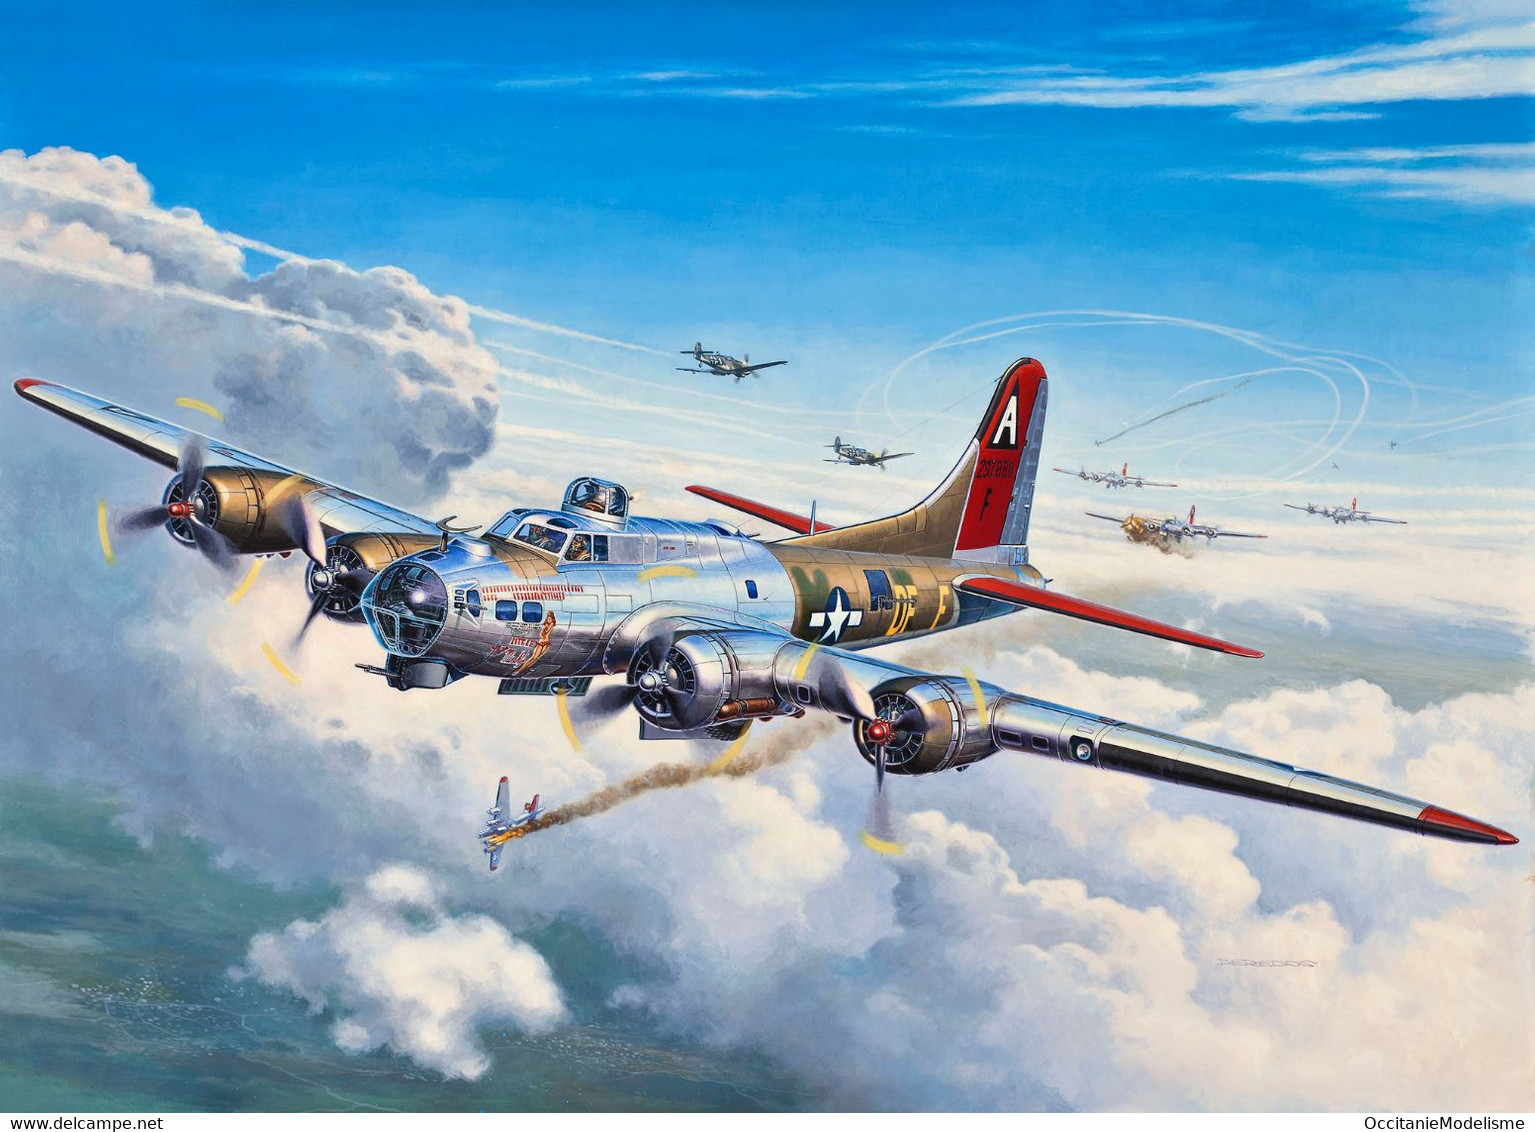 Revell - B-17G FLYING FORTRESS US Army Maquette Avion Kit Plastique Réf. 04283 Neuf NBO 1/72 - Flugzeuge